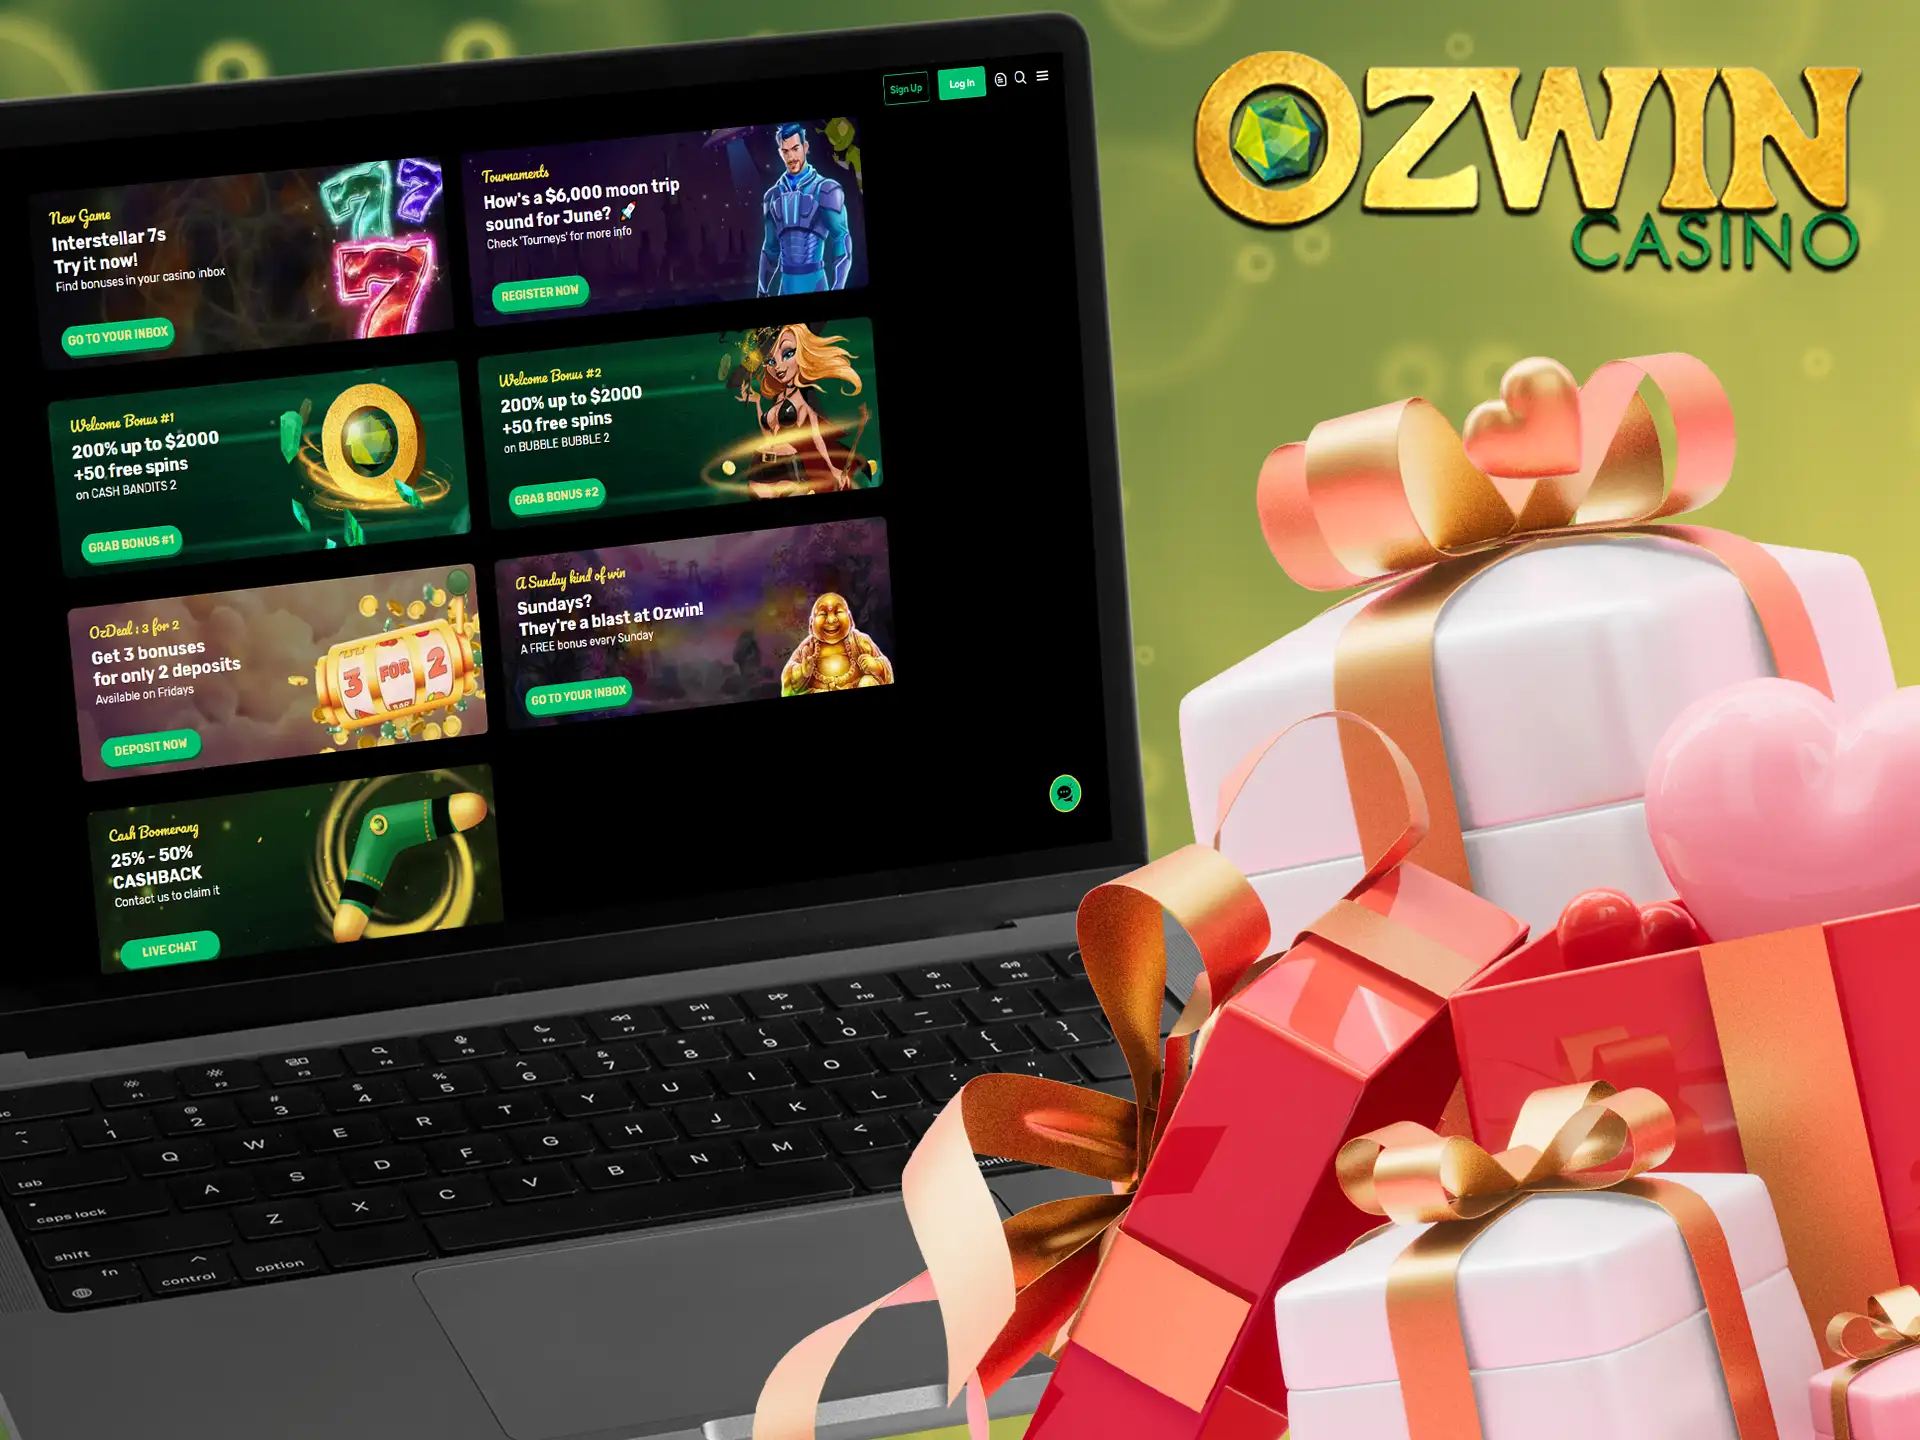 Don't miss out on Ozwin's special offers!